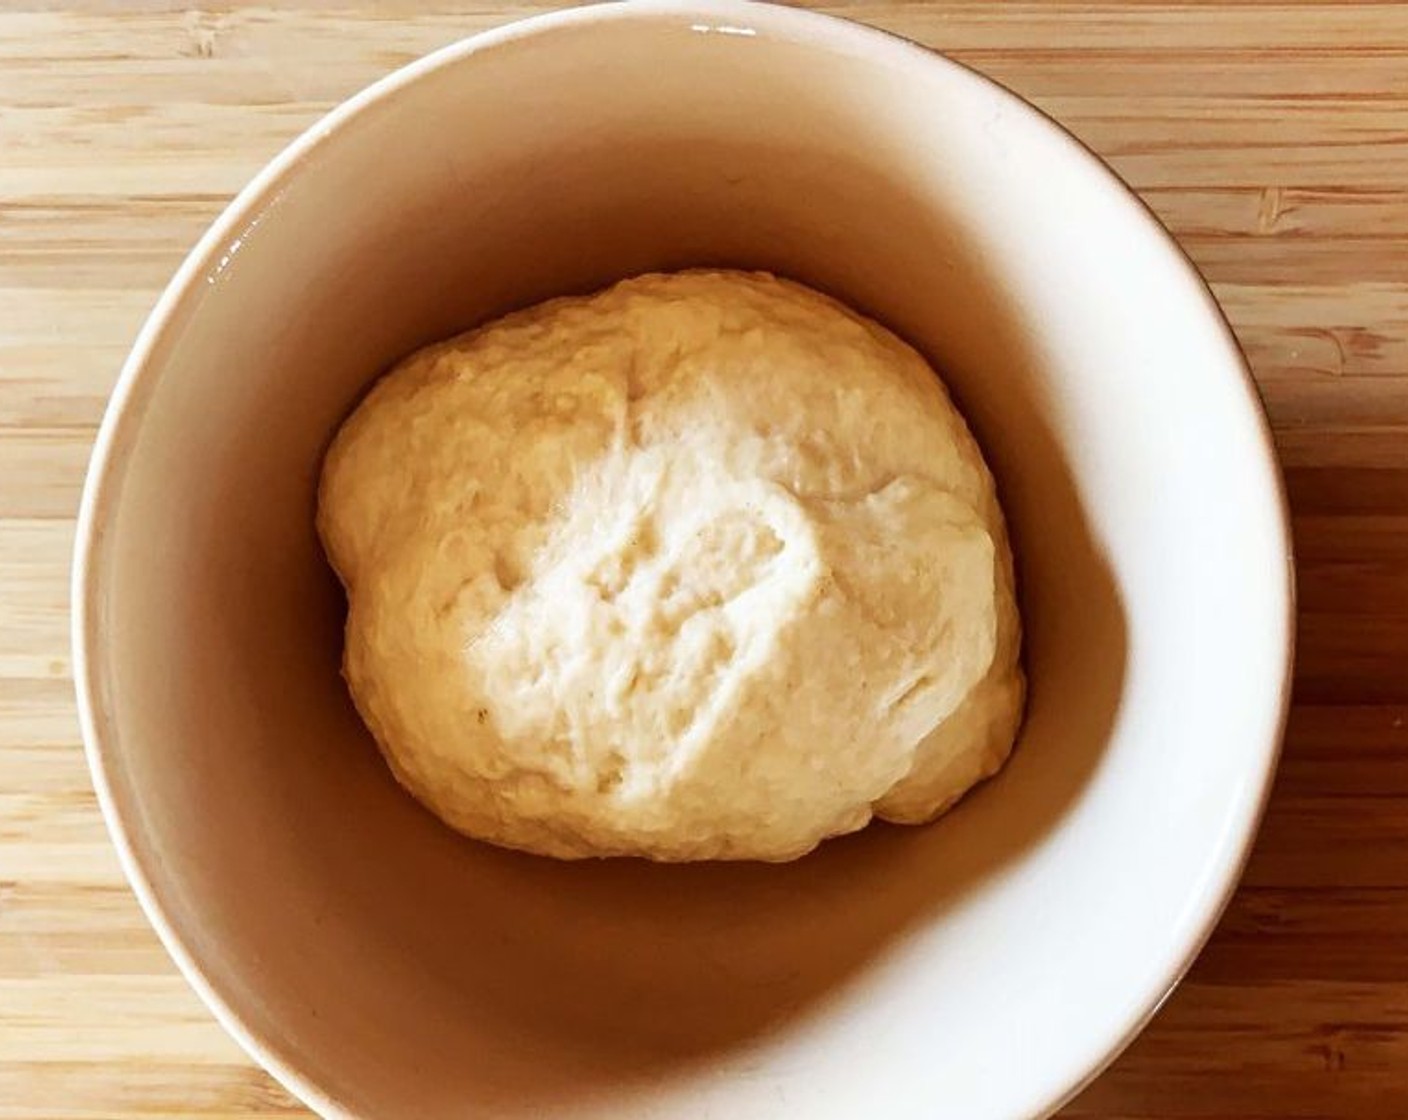 step 3 Add Extra-Virgin Olive Oil (1 tsp) and whey mix to the flour in a large bowl, then knead the mixture until you get a smooth and elastic dough.